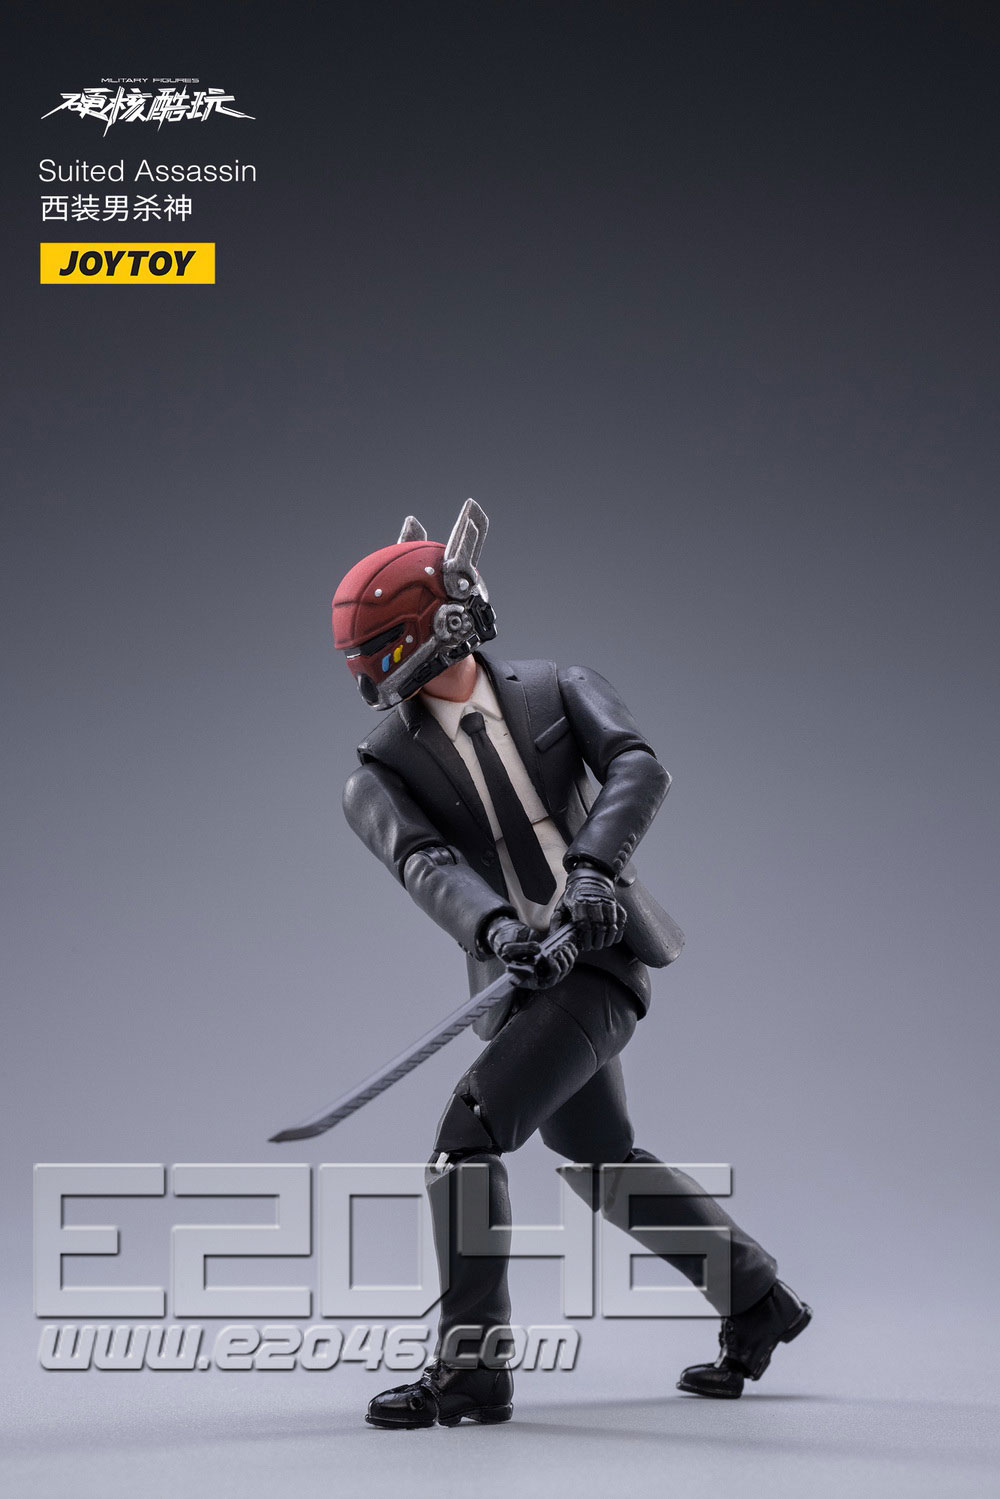 Suited Assassin (DOLL)